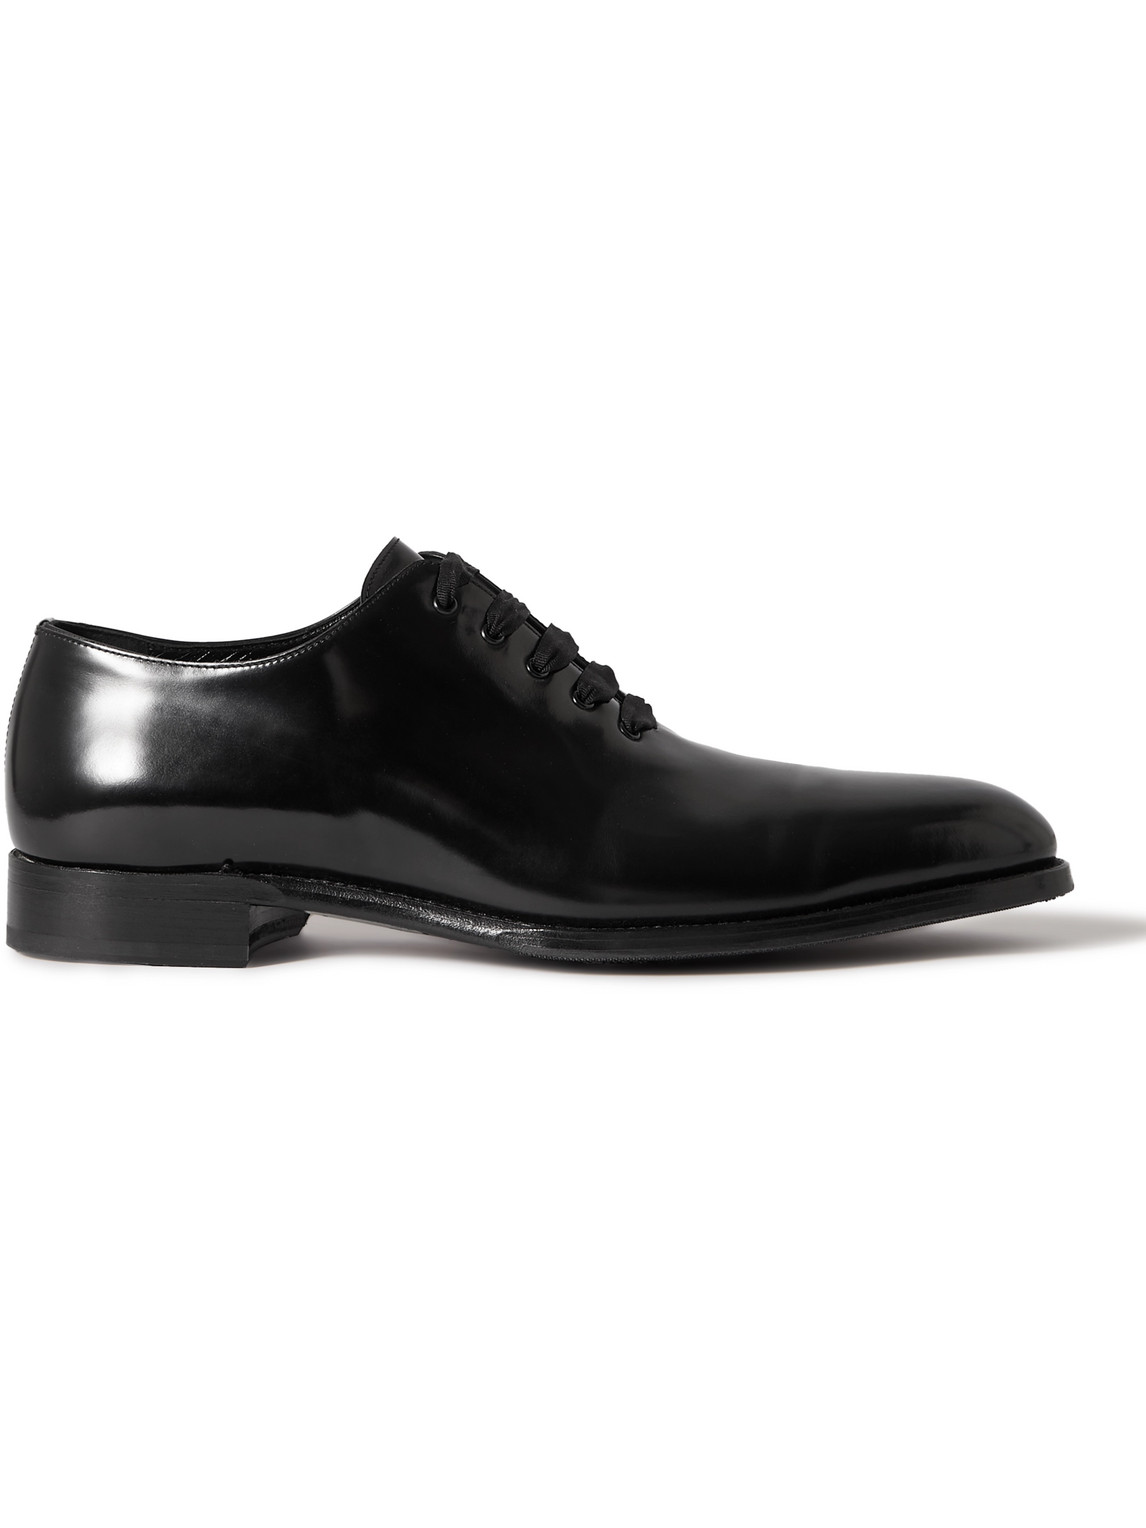 Dunhill Evening Oxford Shoe In Black